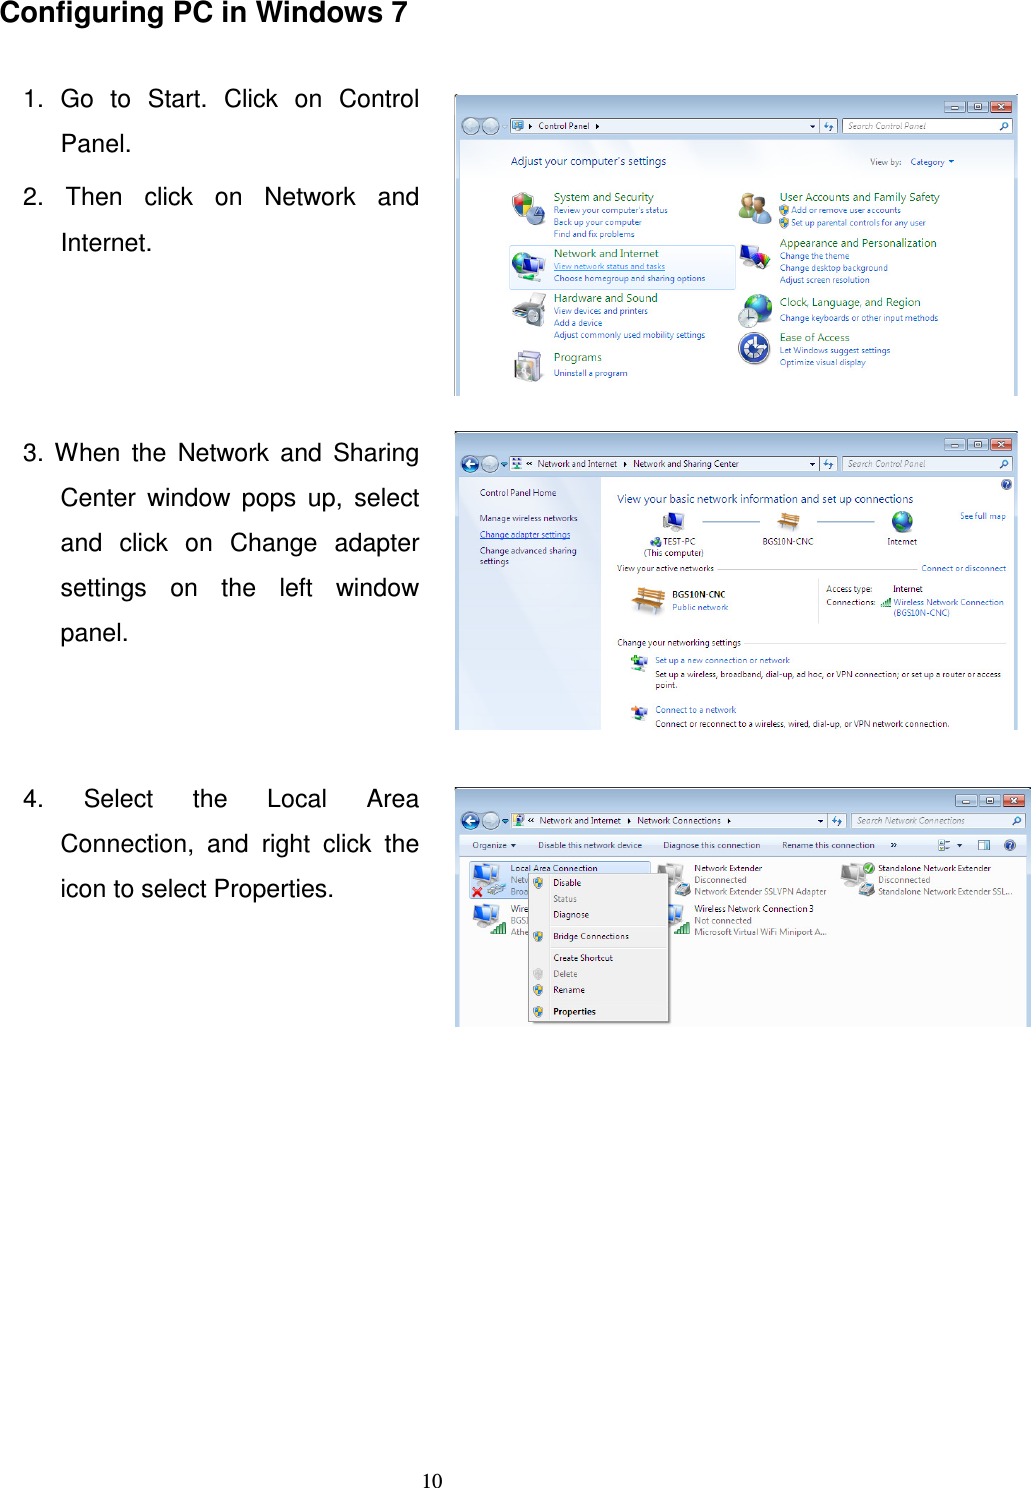   10Configuring PC in Windows 7  1.  Go  to  Start.  Click  on  Control Panel. 2.  Then  click  on  Network  and Internet.   3.  When  the  Network  and  Sharing Center  window  pops  up,  select and  click  on  Change  adapter settings  on  the  left  window panel.  4.  Select  the  Local  Area Connection,  and  right  click  the icon to select Properties.           